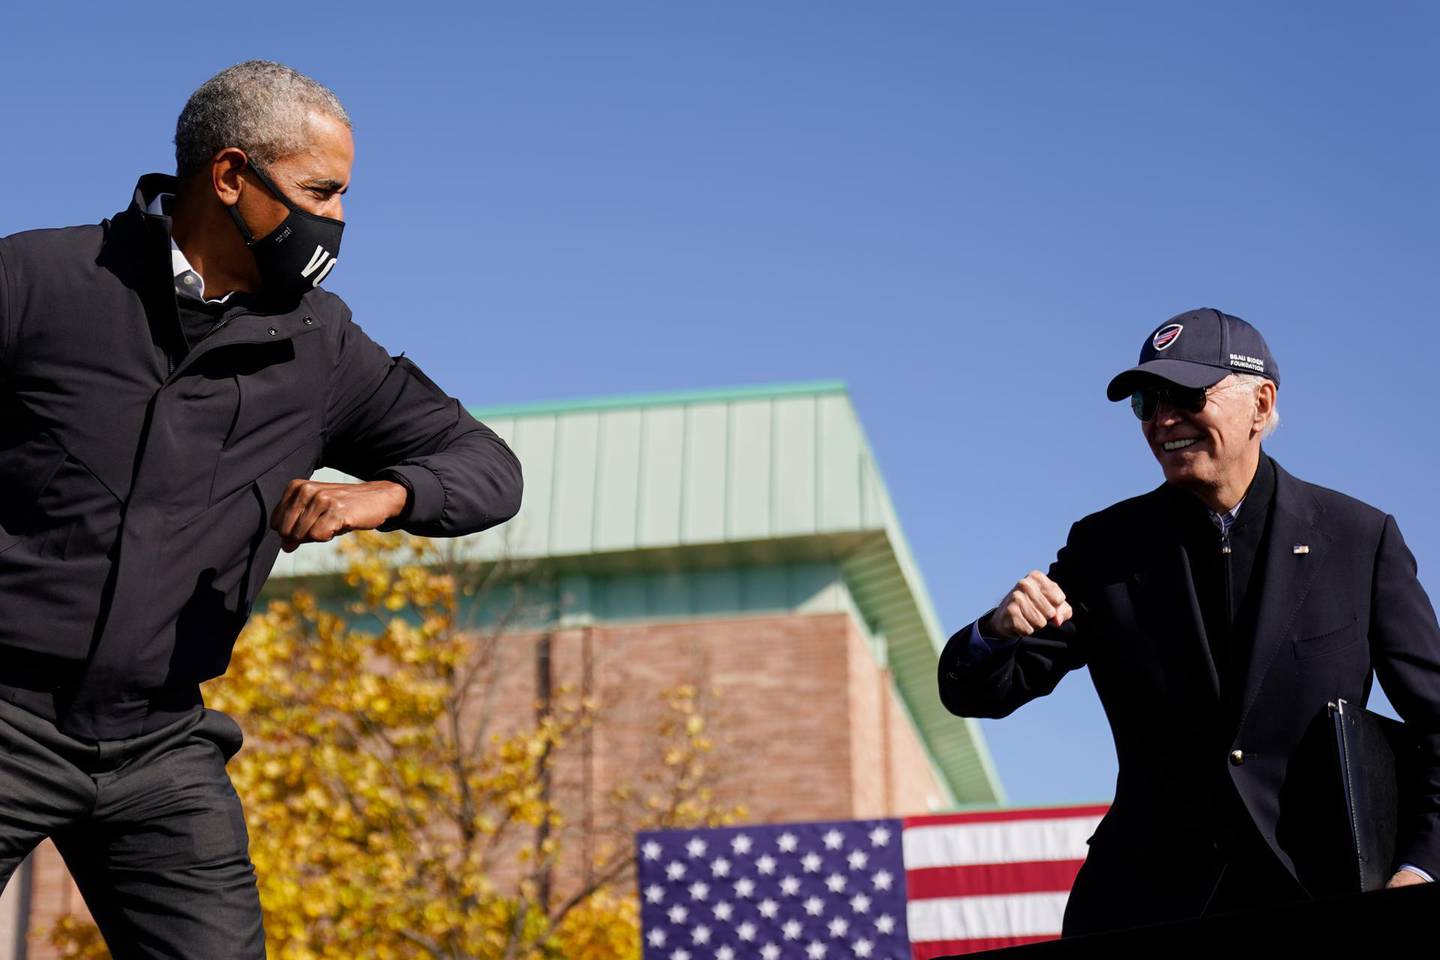 Democratic presidential candidate former Vice President Joe Biden, right, and former President Barack Obama greet each other with an air elbow bump, at the conclusion of rally at Northwestern High School in Flint, Mich., Saturday, Oct. 31, 2020. (AP Photo/Andrew Harnik)